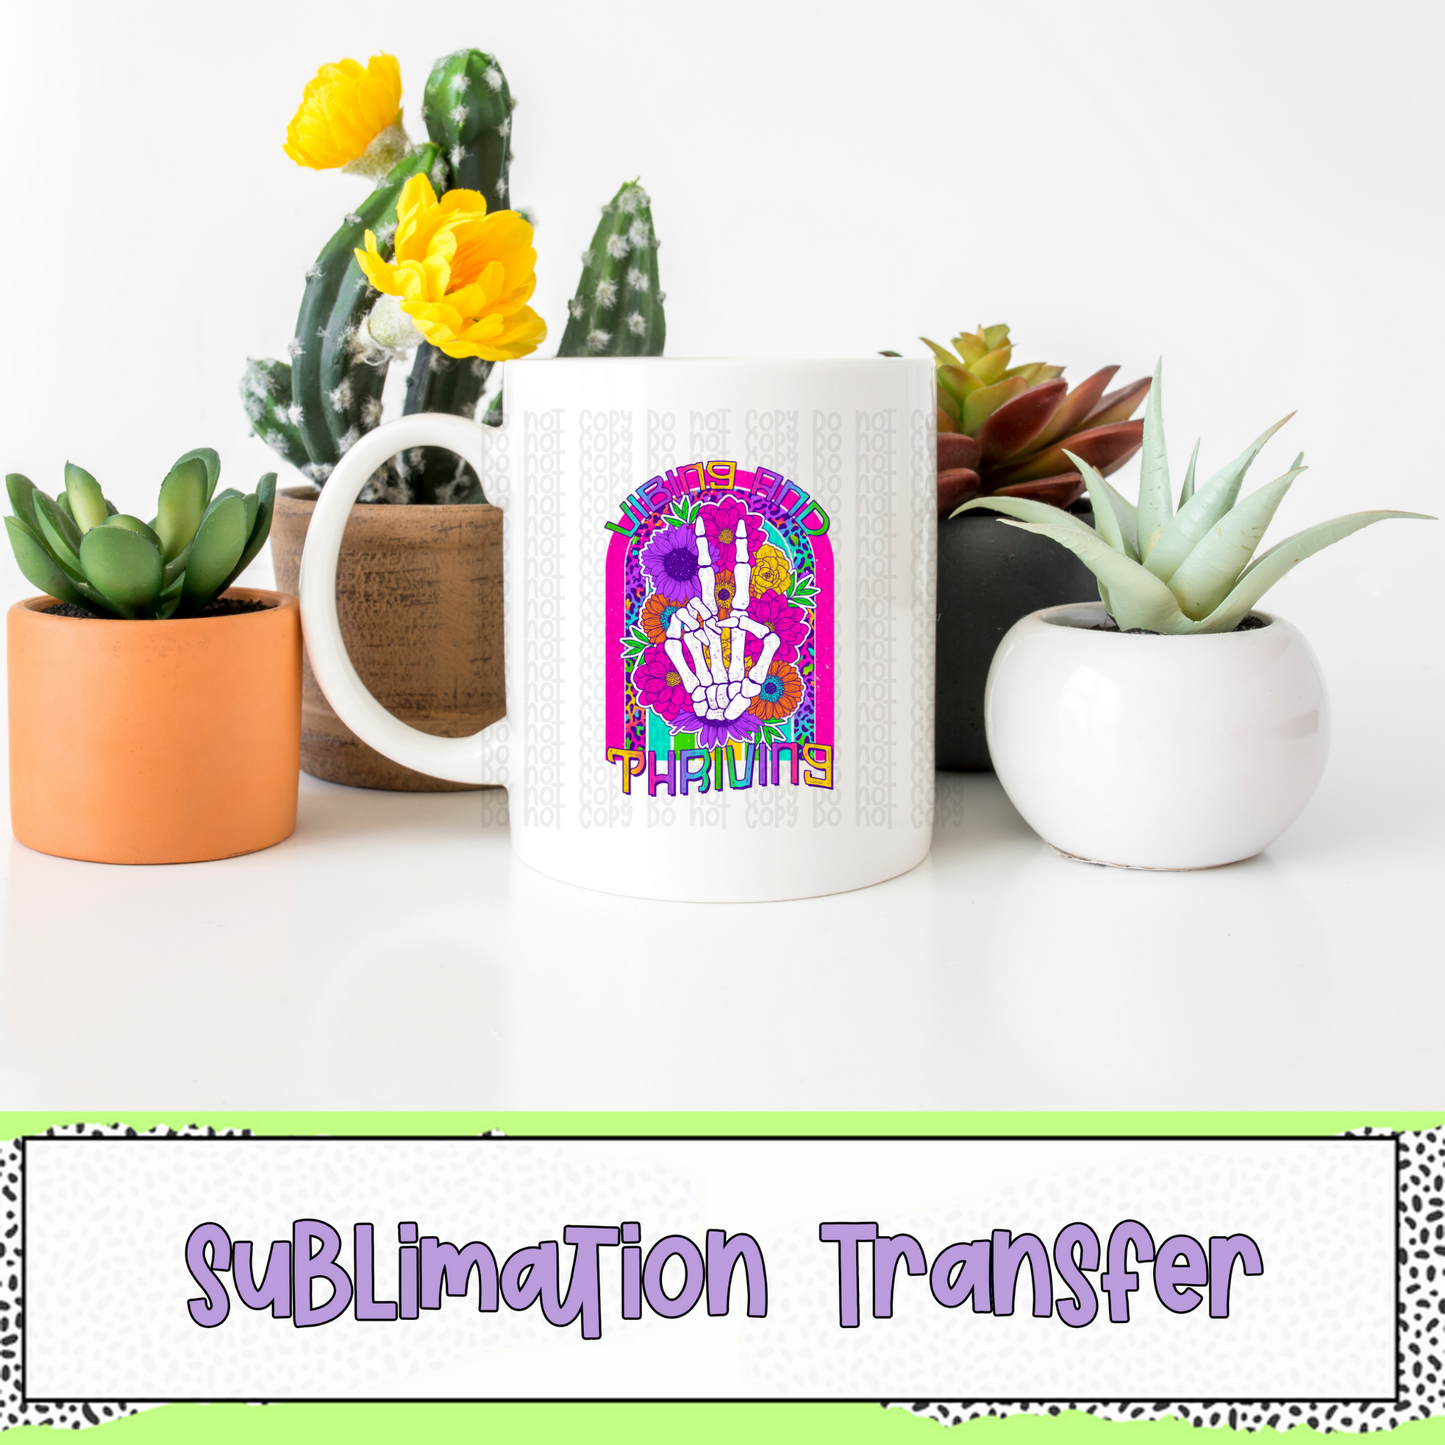 Vibing and Thriving - SUBLIMATION TRANSFER